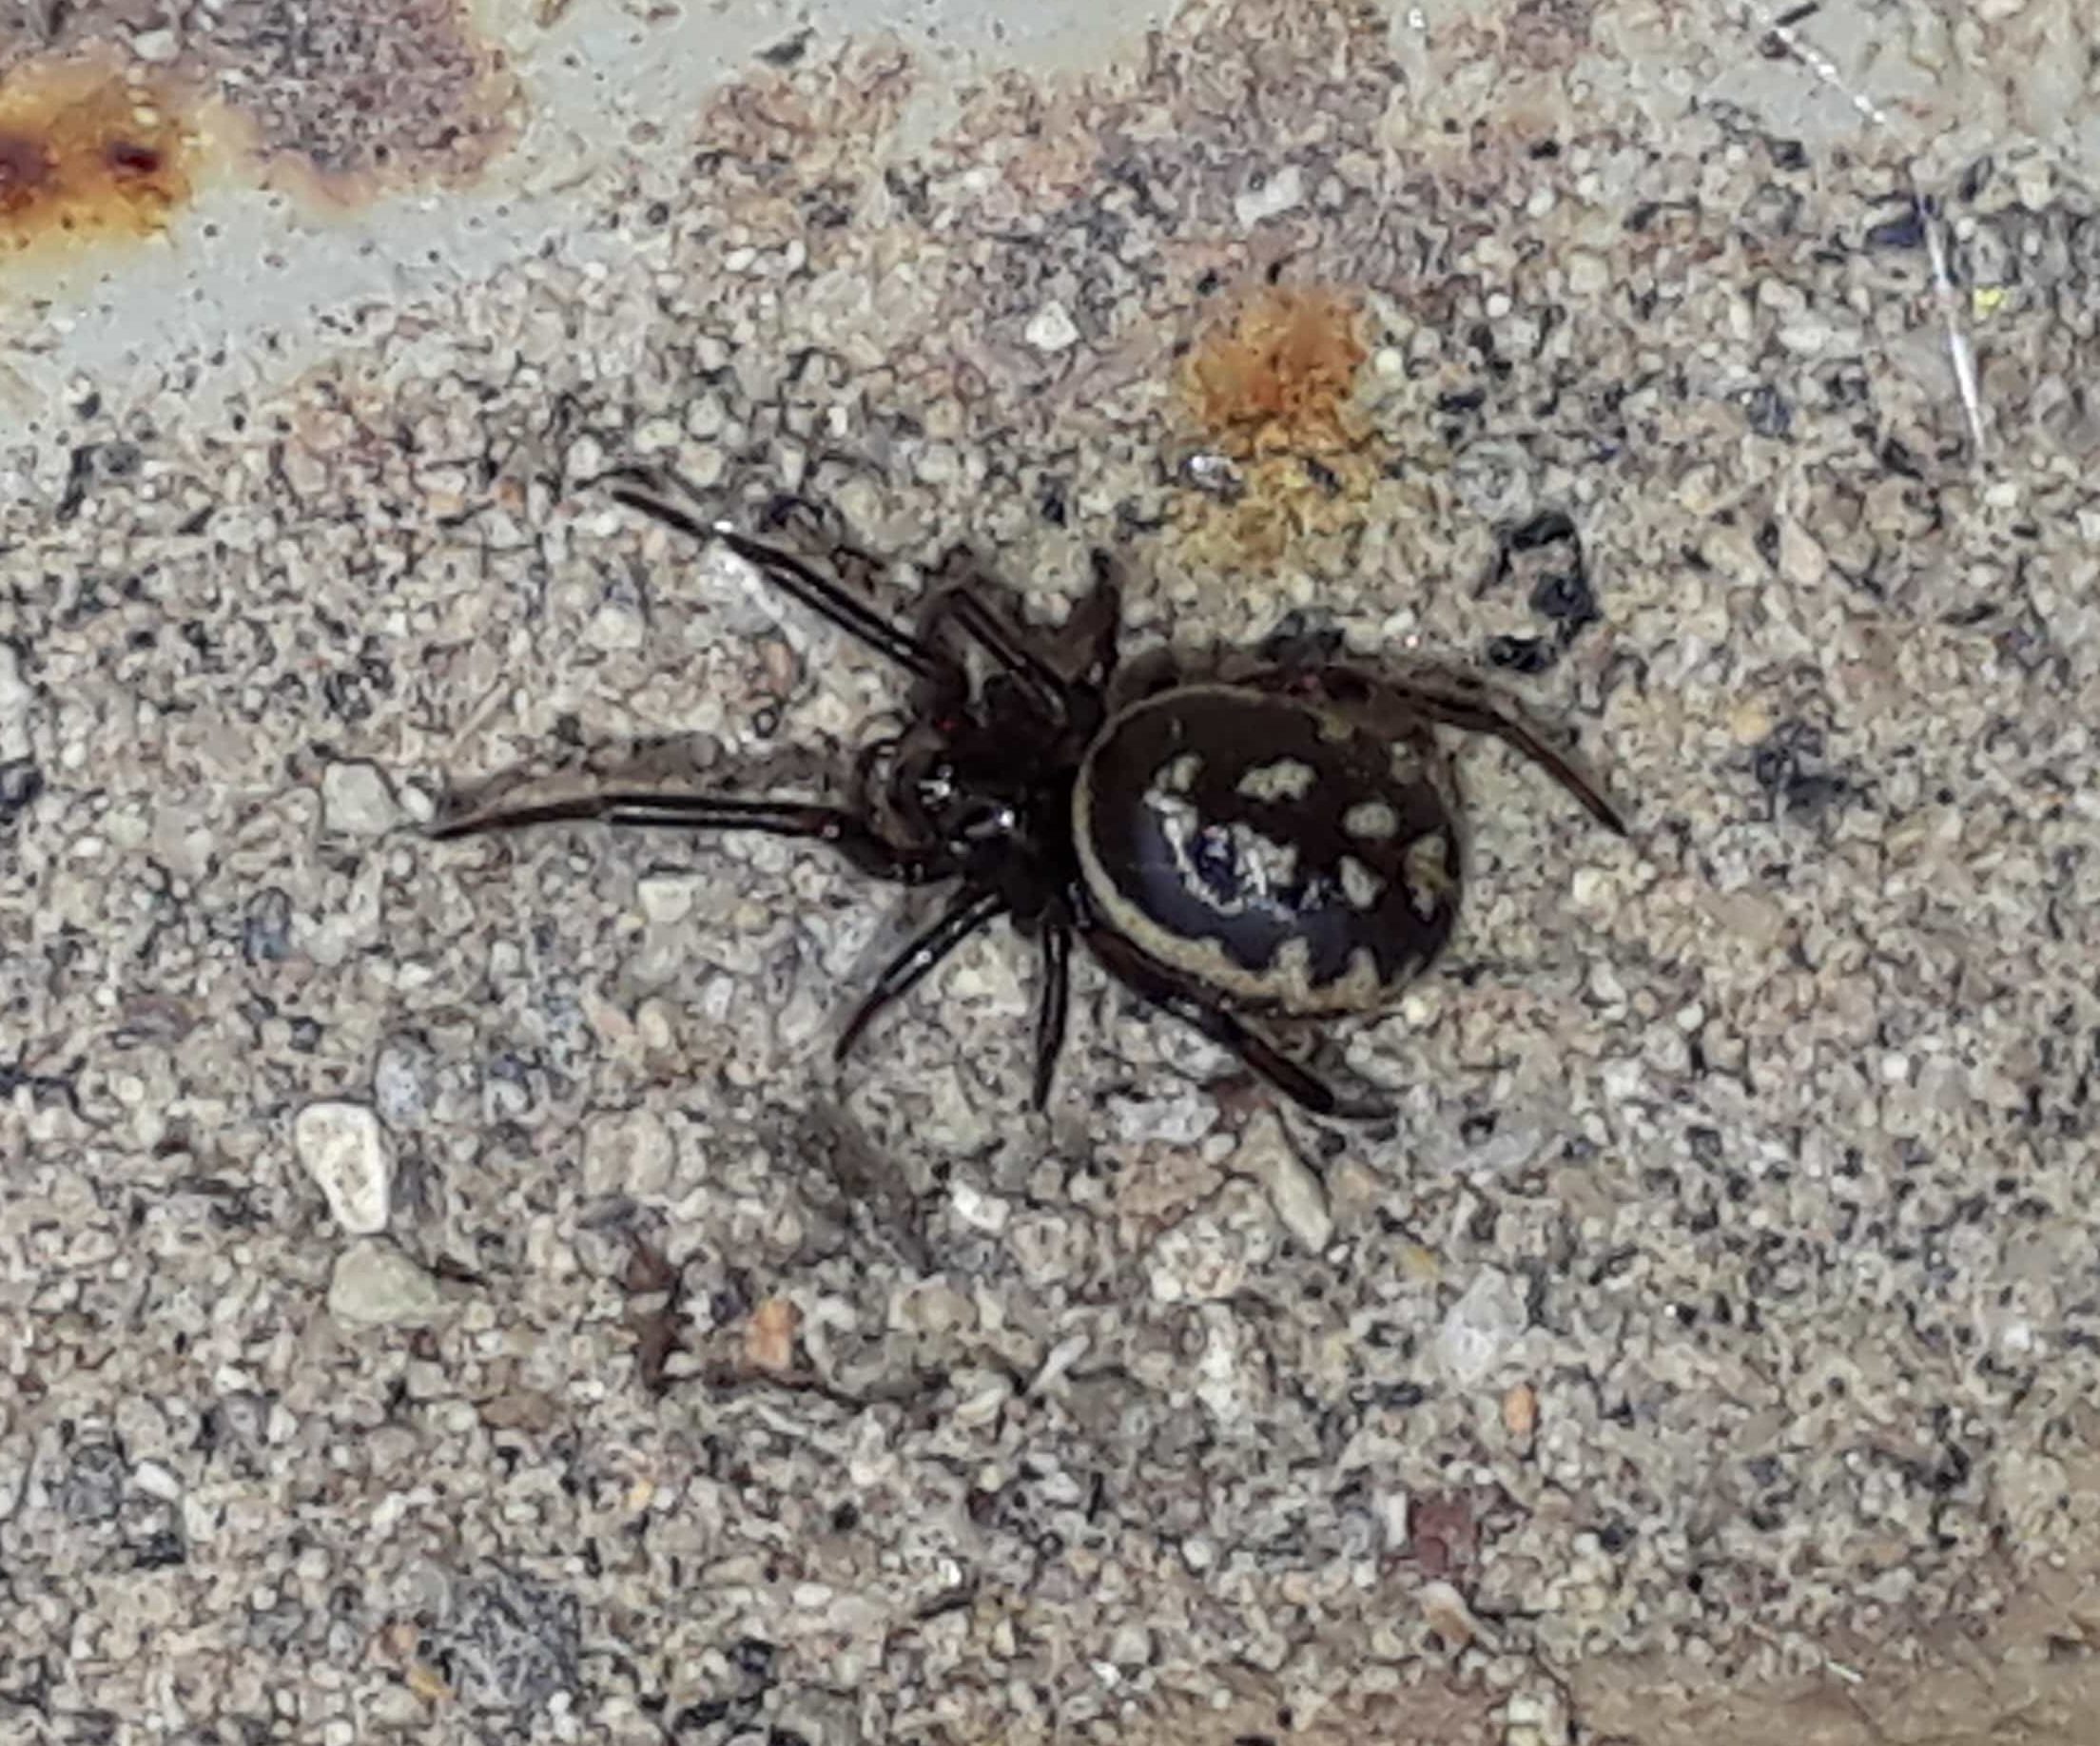 Picture of Steatoda albomaculata (White-spotted False Widow) - Dorsal